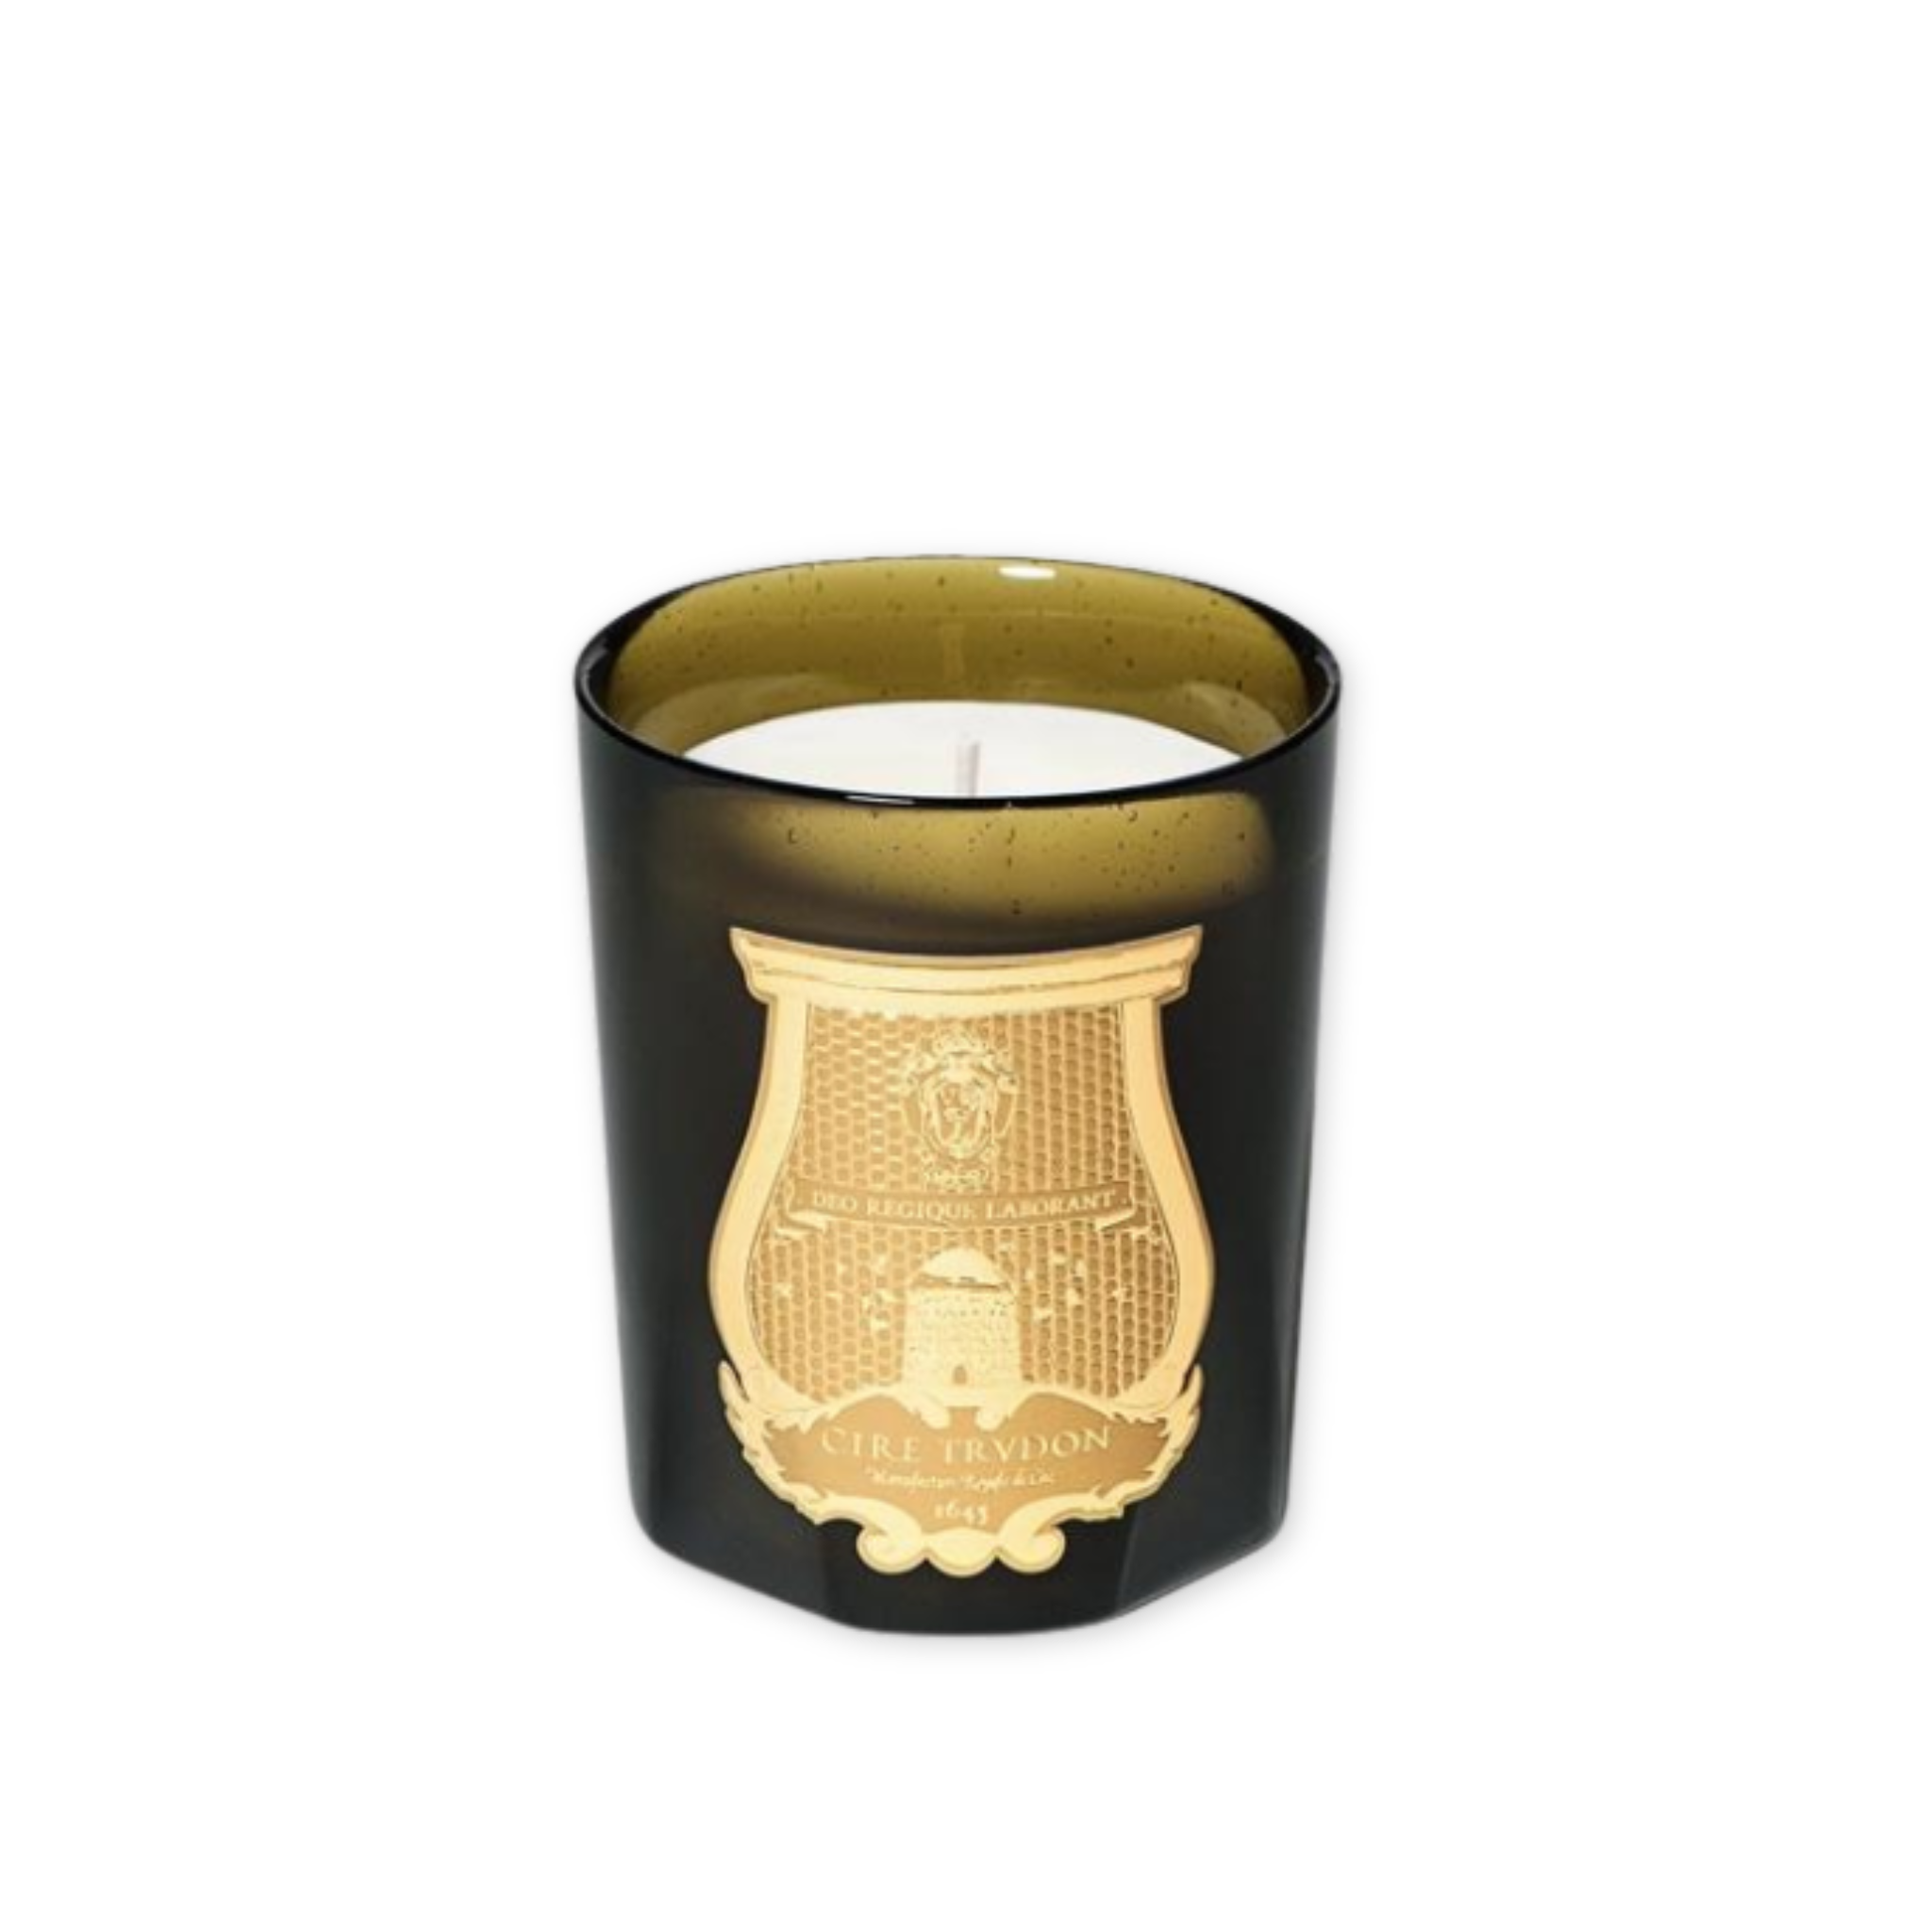 olibanum and alter perfume scented candle